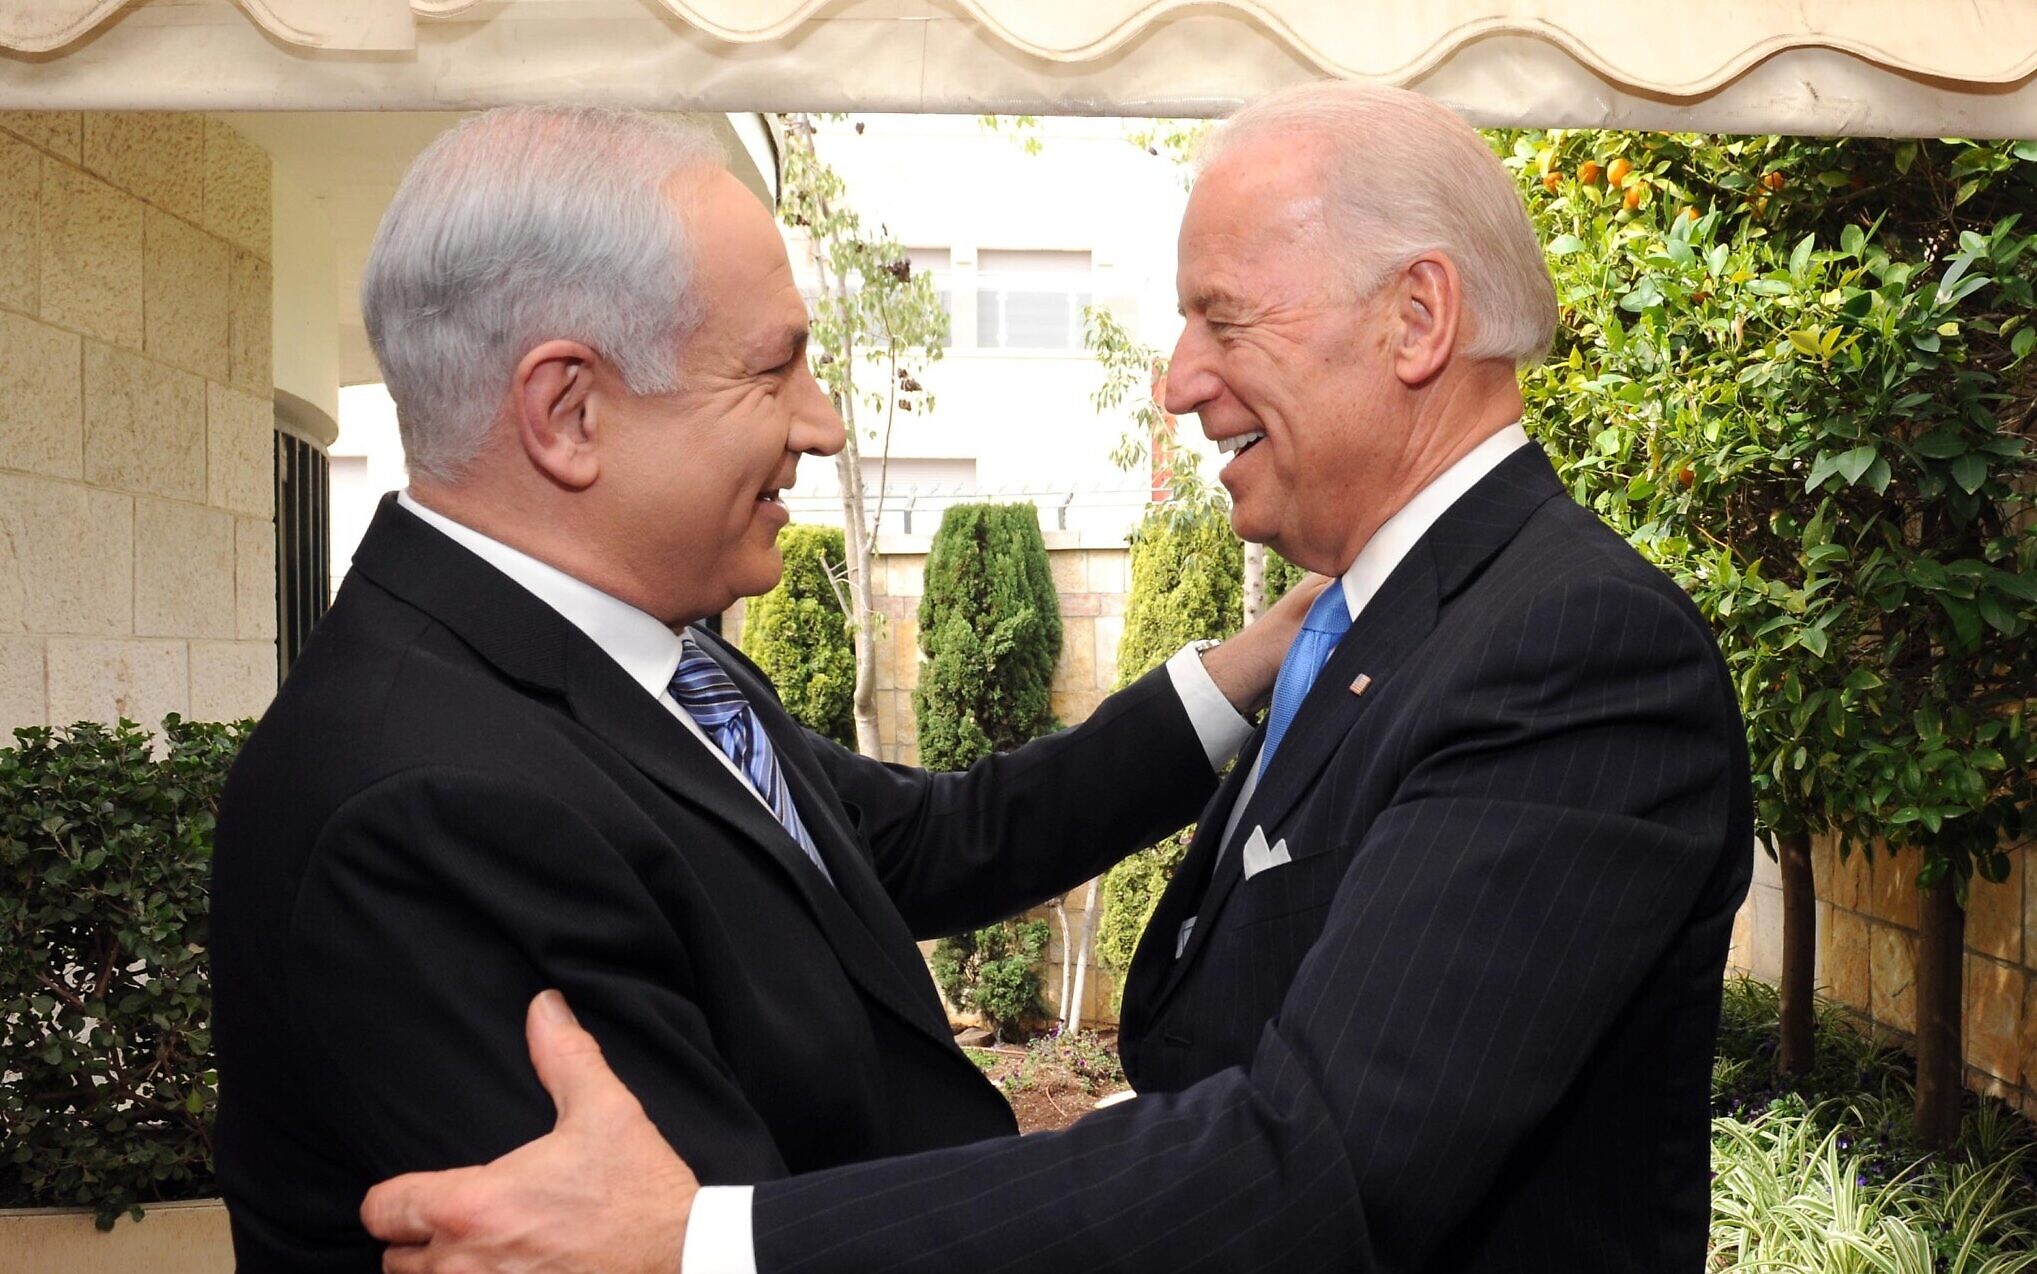 Can Biden Survive Funding More Israeli Bombs? His Record Doesn’t Help…